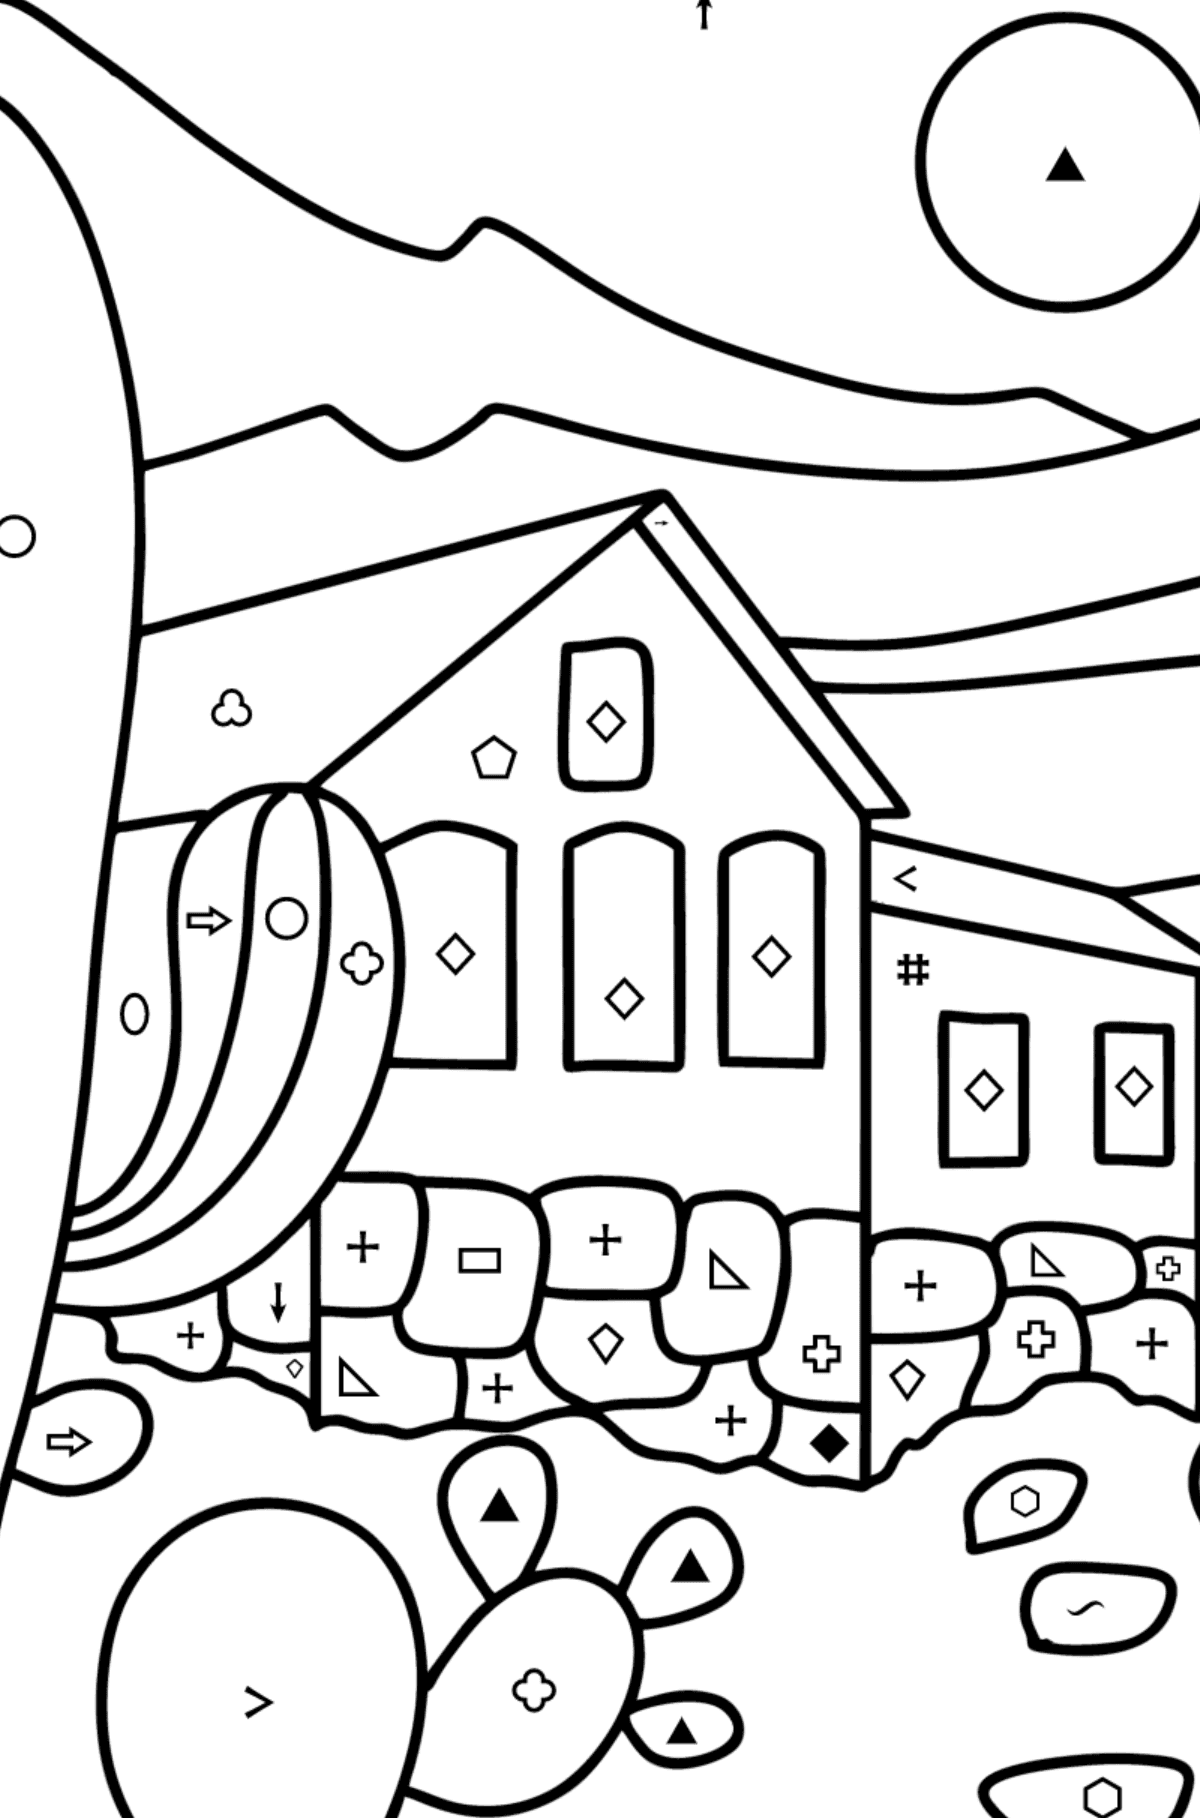 Cottage in the desert coloring page - Coloring by Symbols and Geometric Shapes for Kids